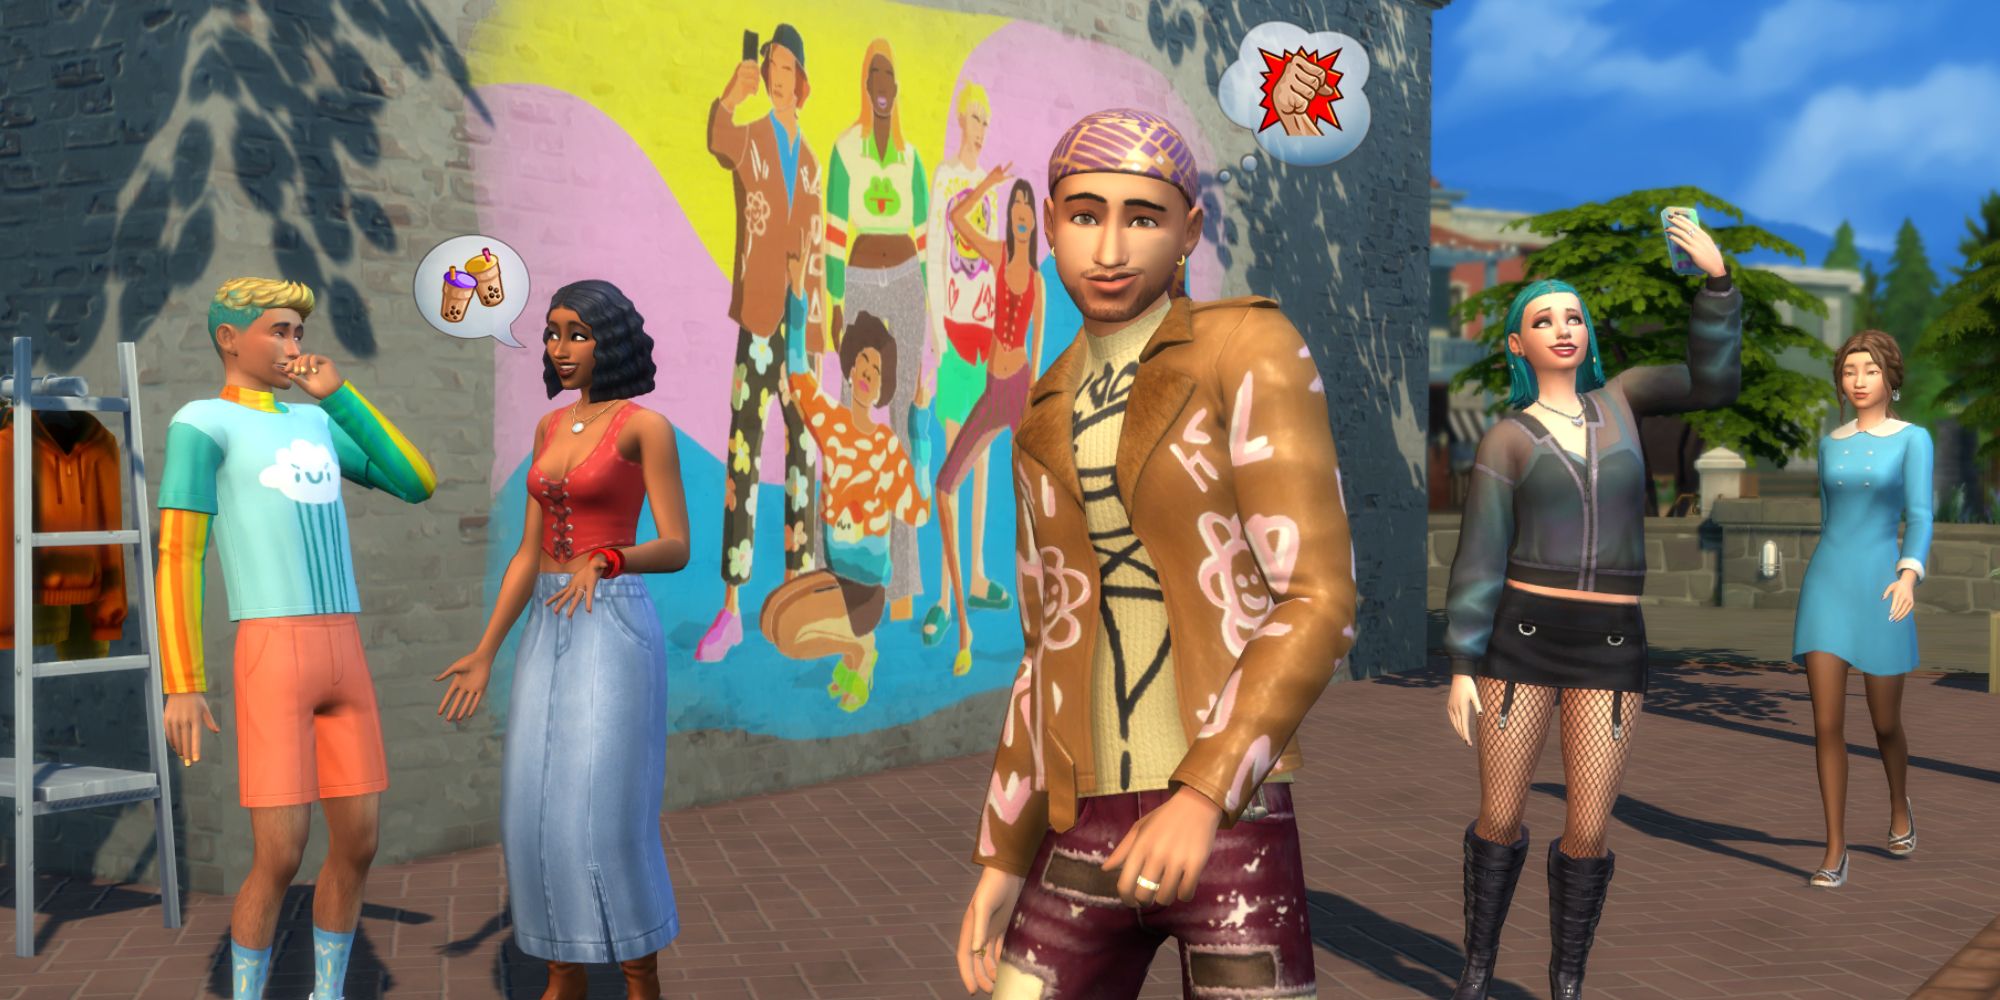 TS4 teens in depop outfits